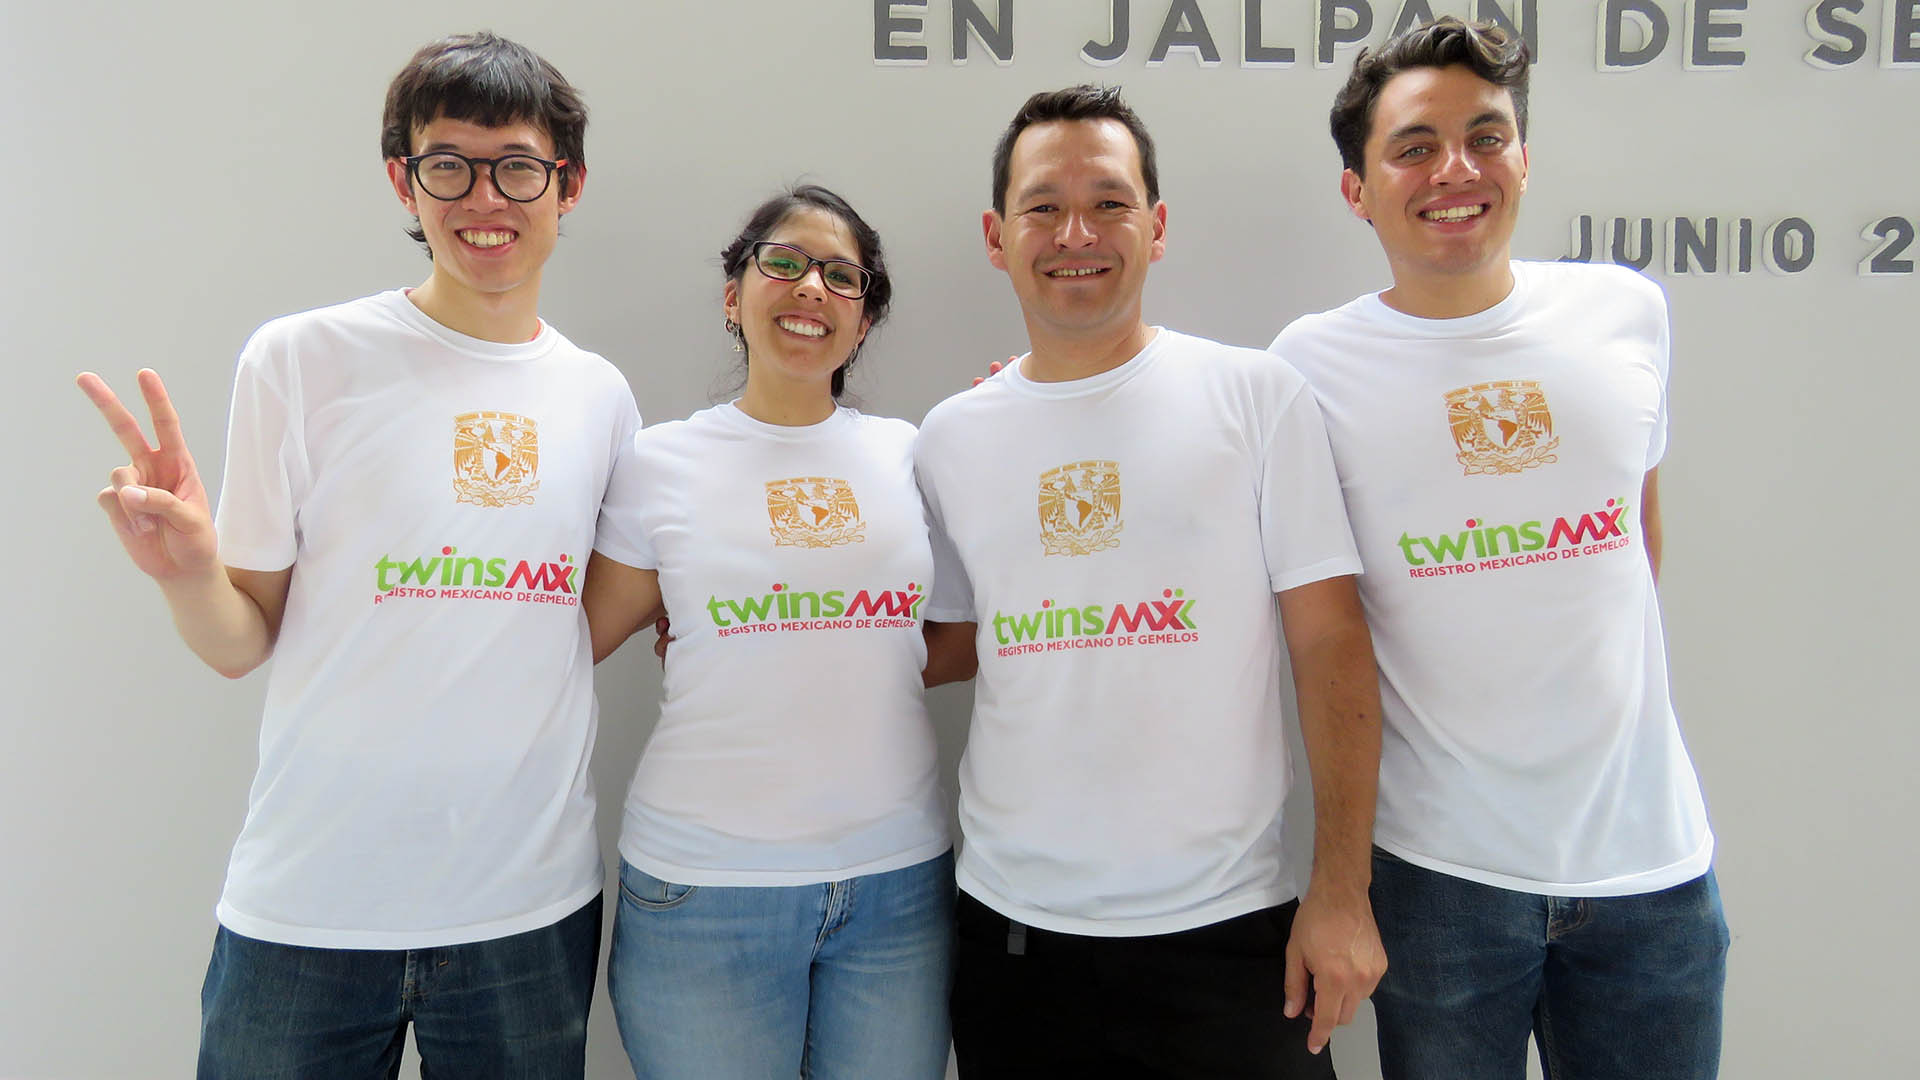 Four people smile wearing white shirts that read “TwinsMX Registro Mexicano de Gemelos.” 